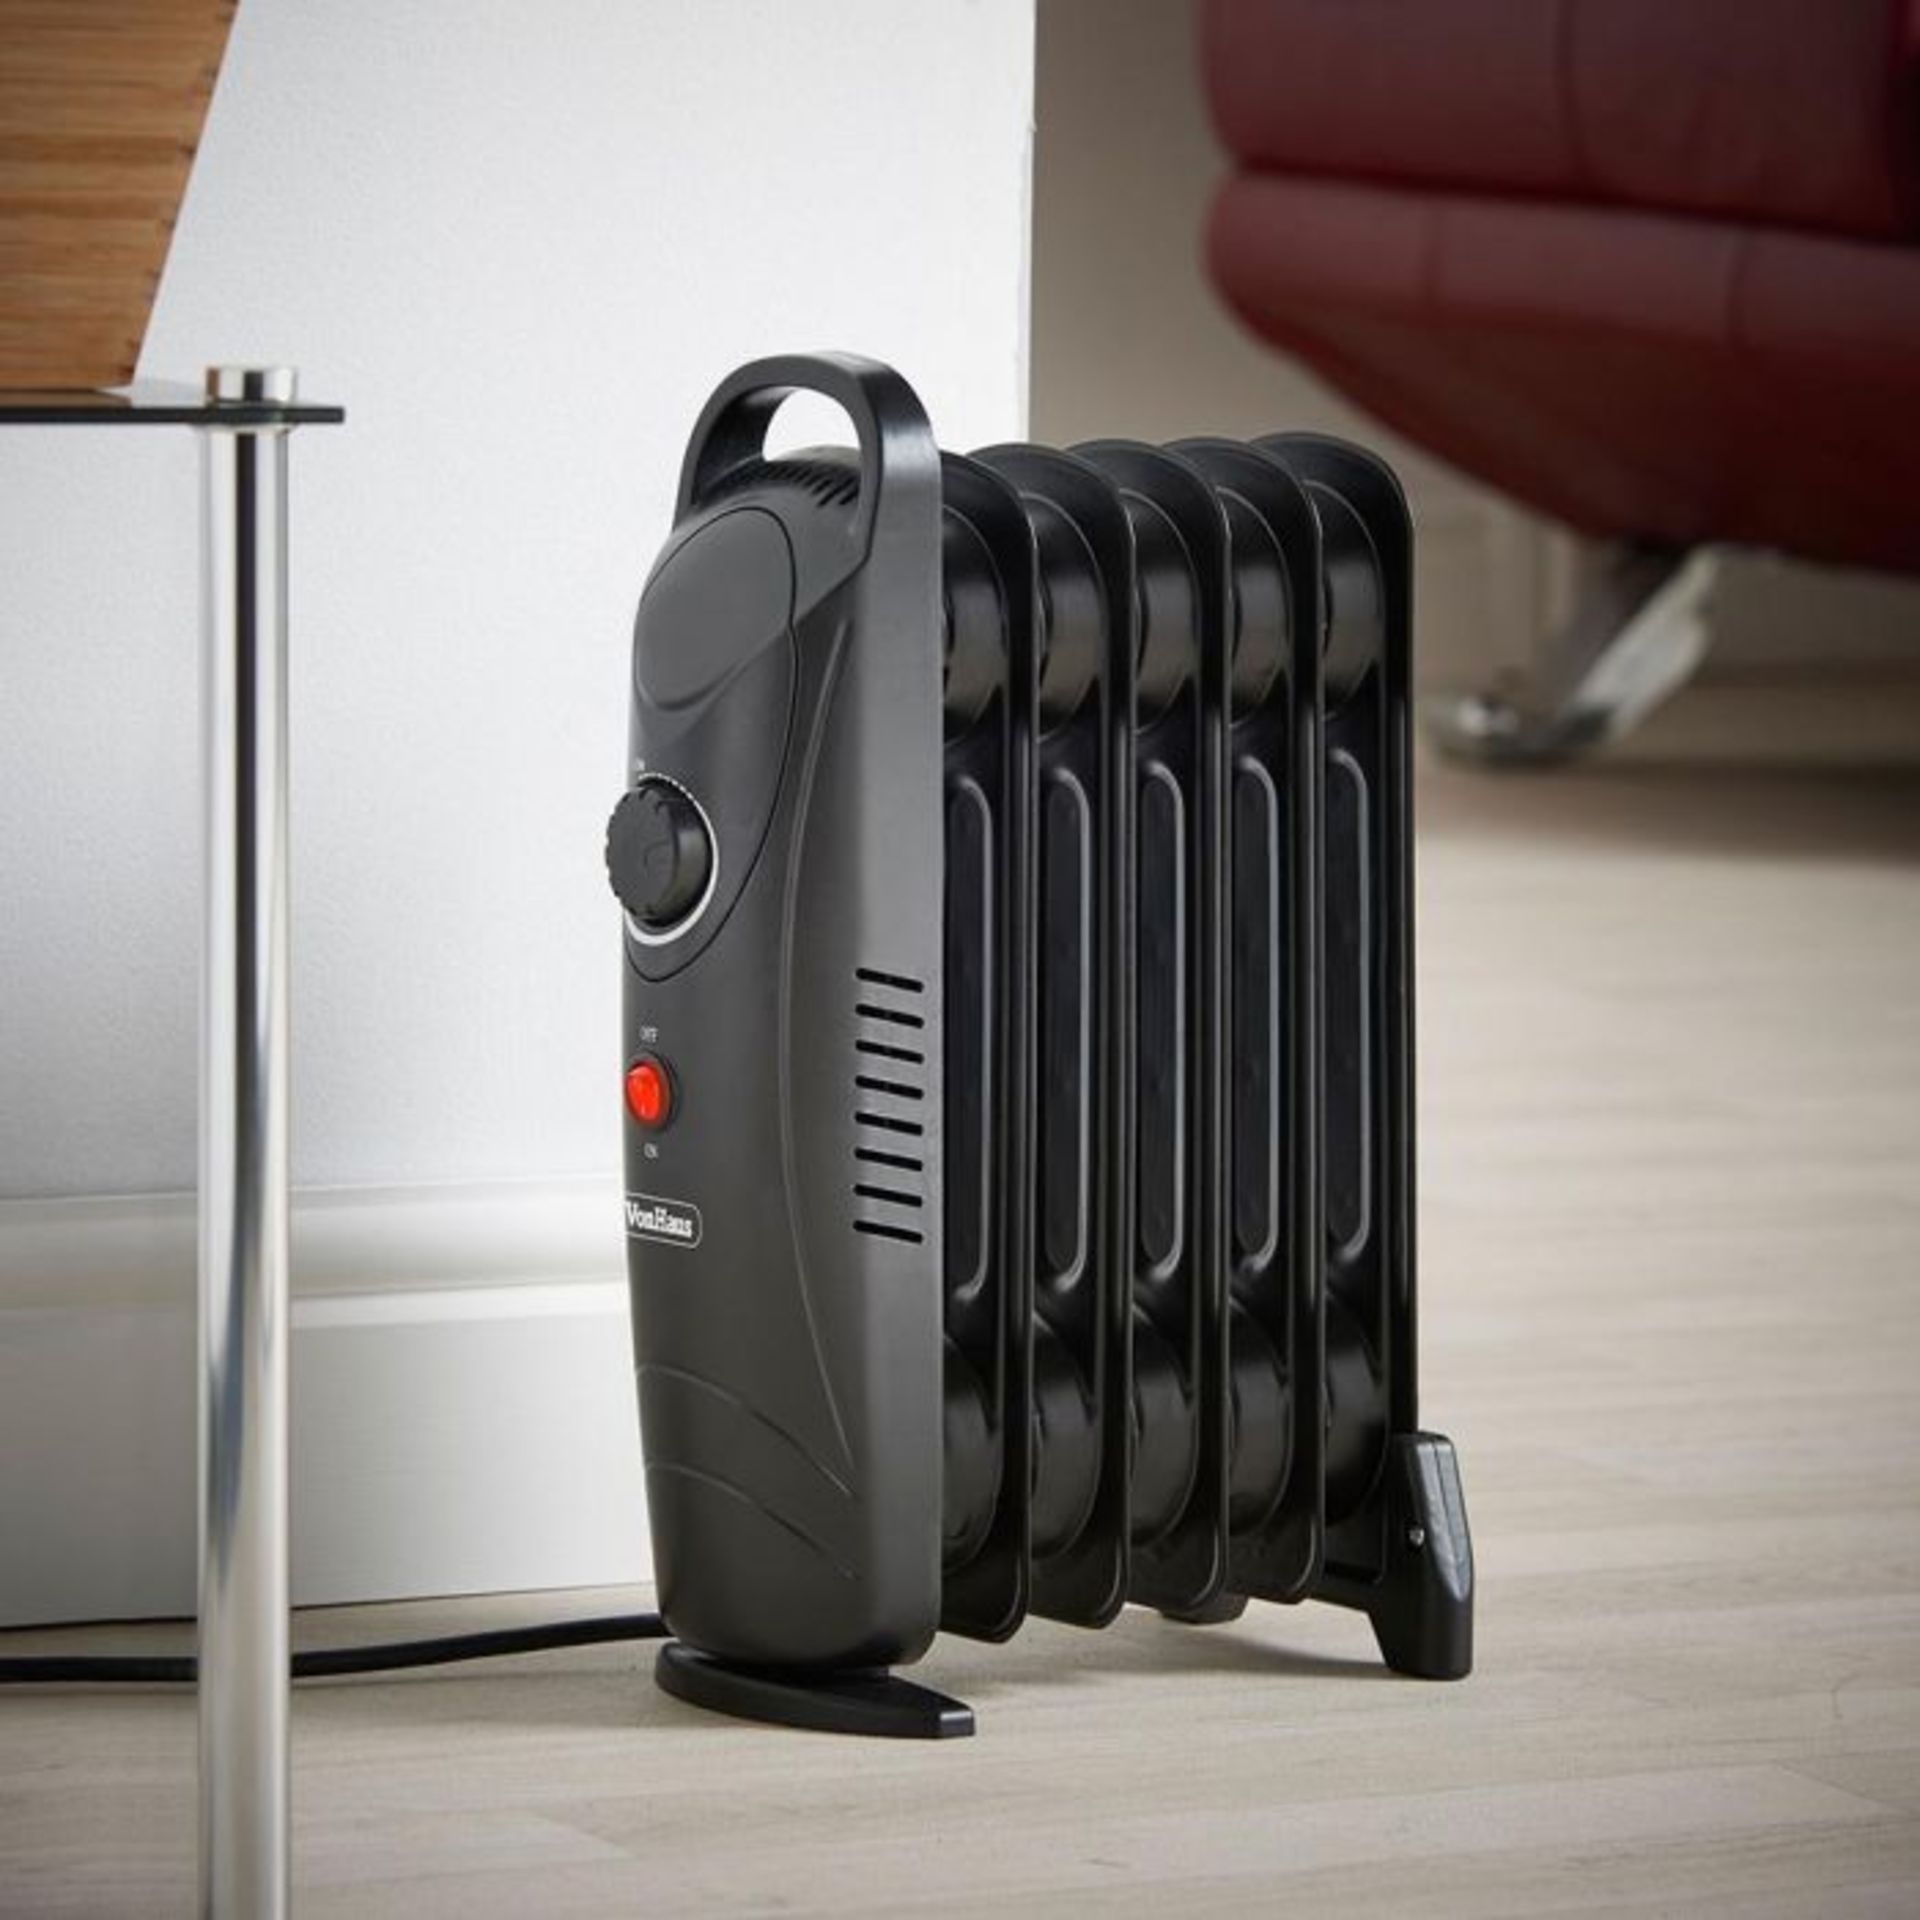 (V17) 6 Fin 800W Oil Filled Radiator - Black Compact yet powerful 800W radiator with 6 oil-fil...